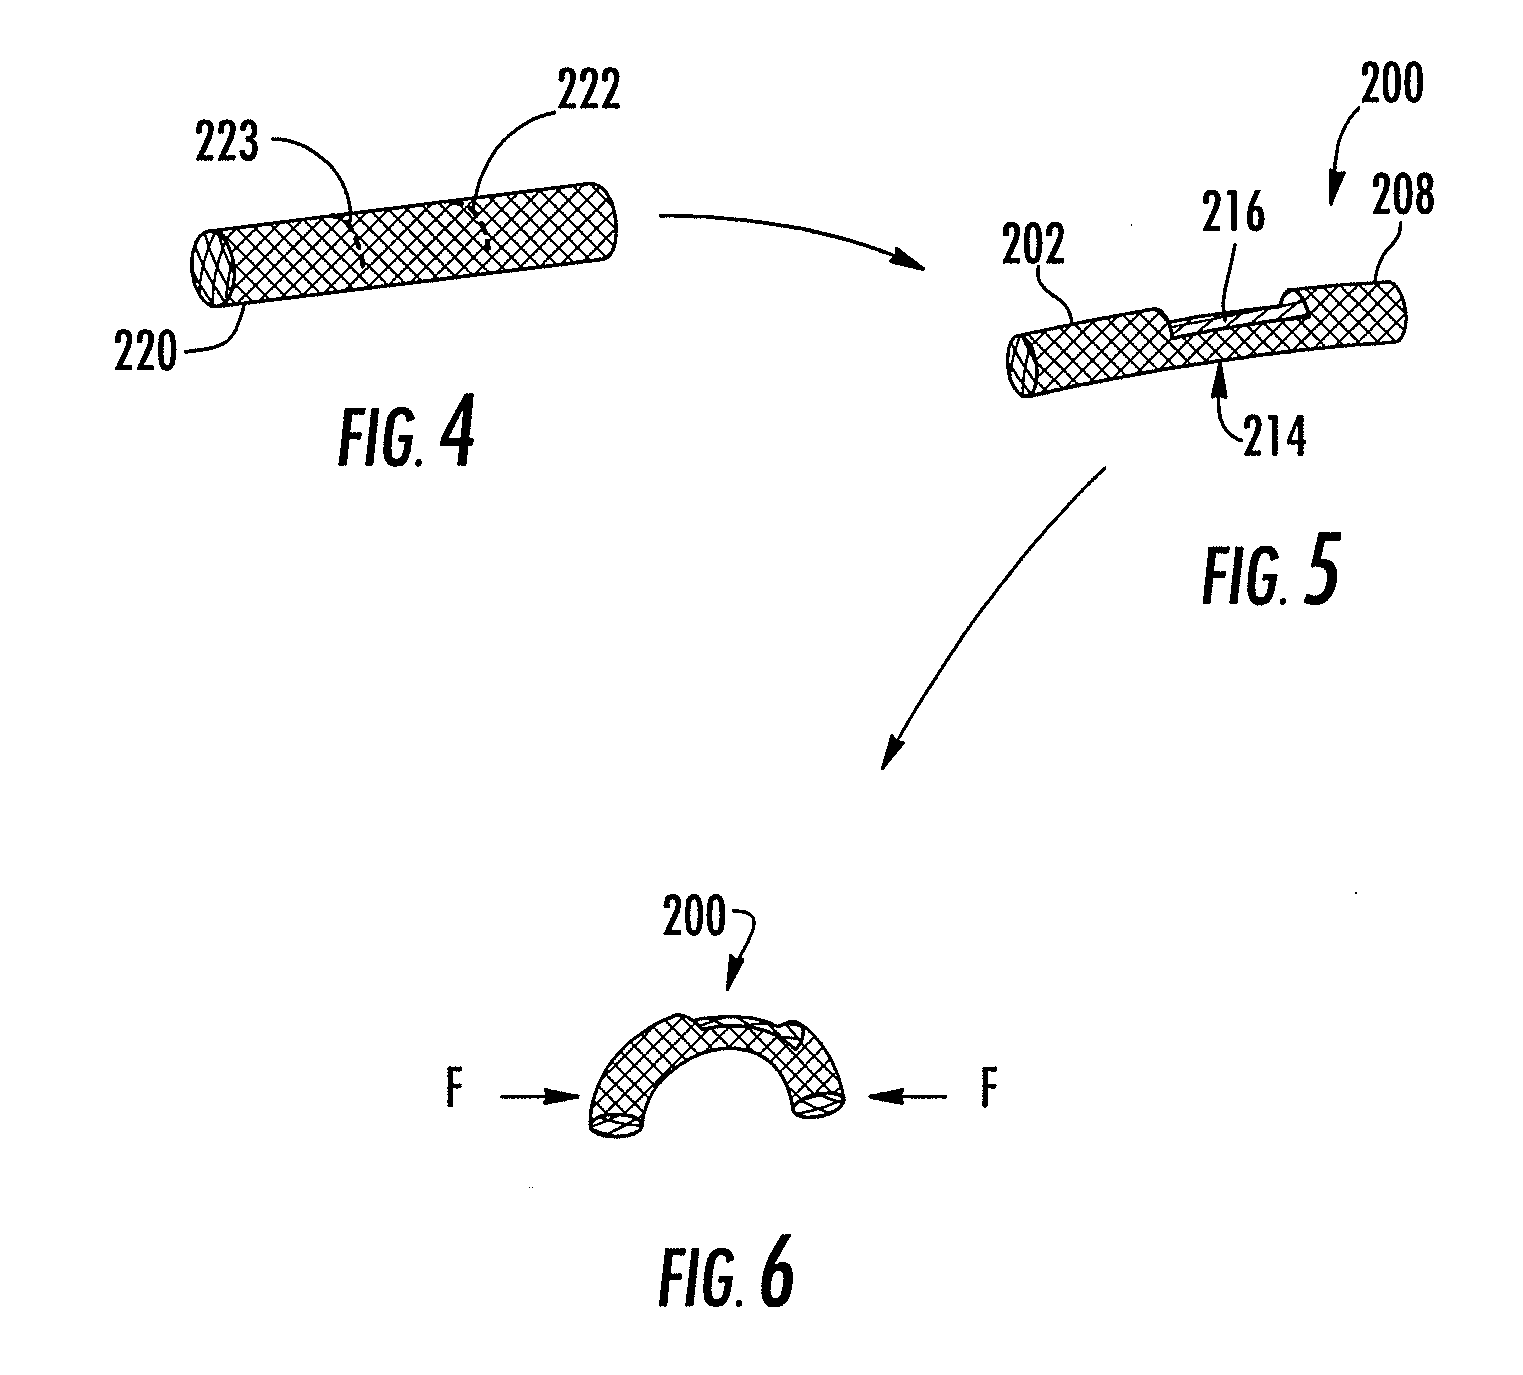 Stent graft having extended landing area and method for using the same